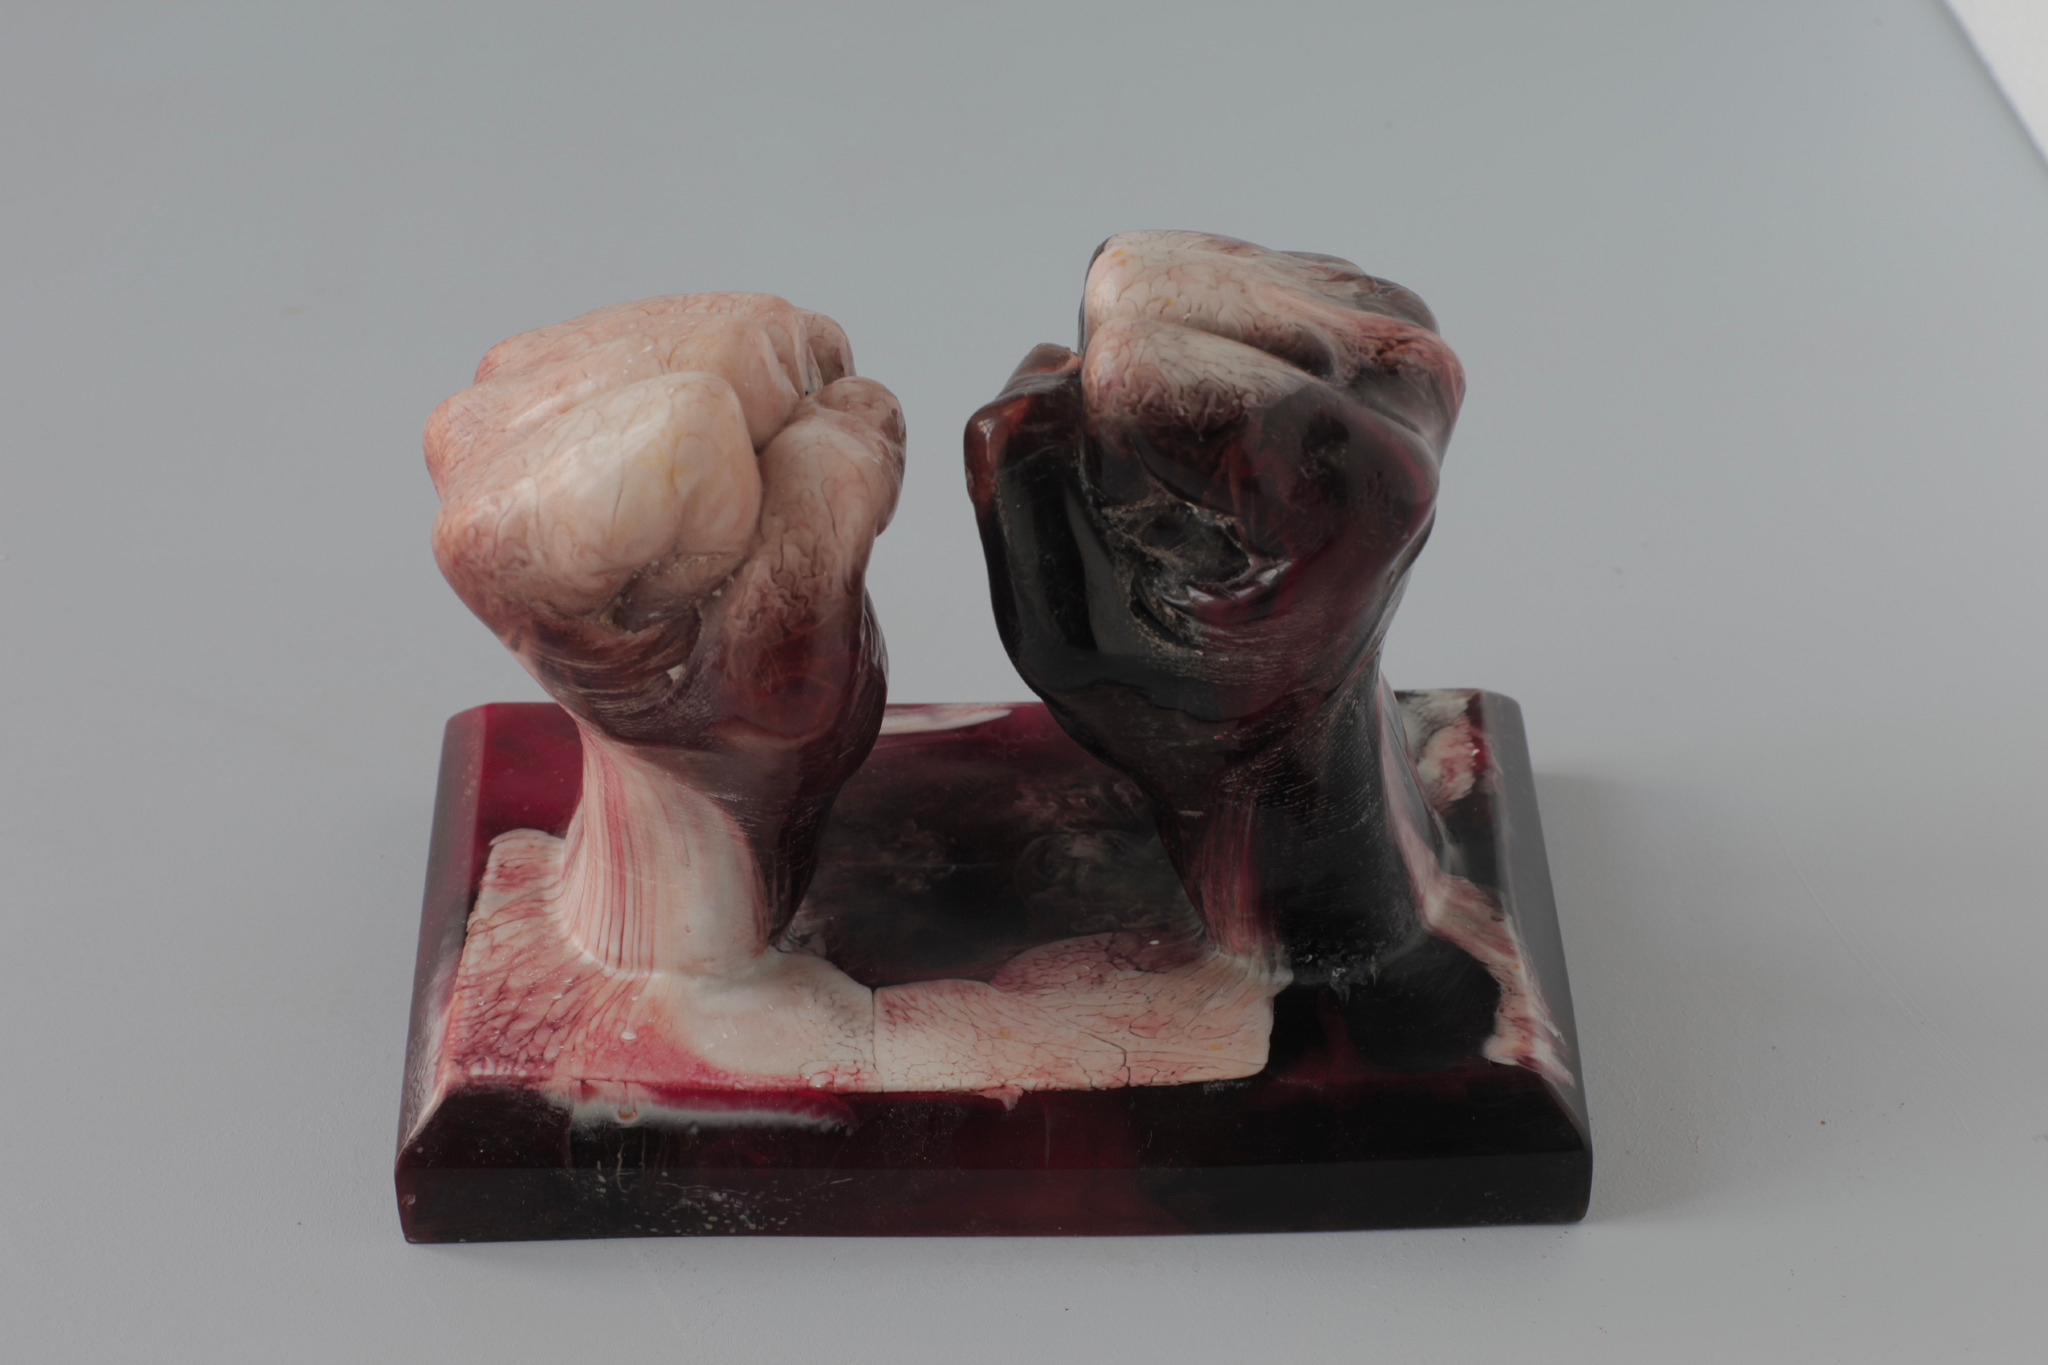 Sculpture of two fists in red